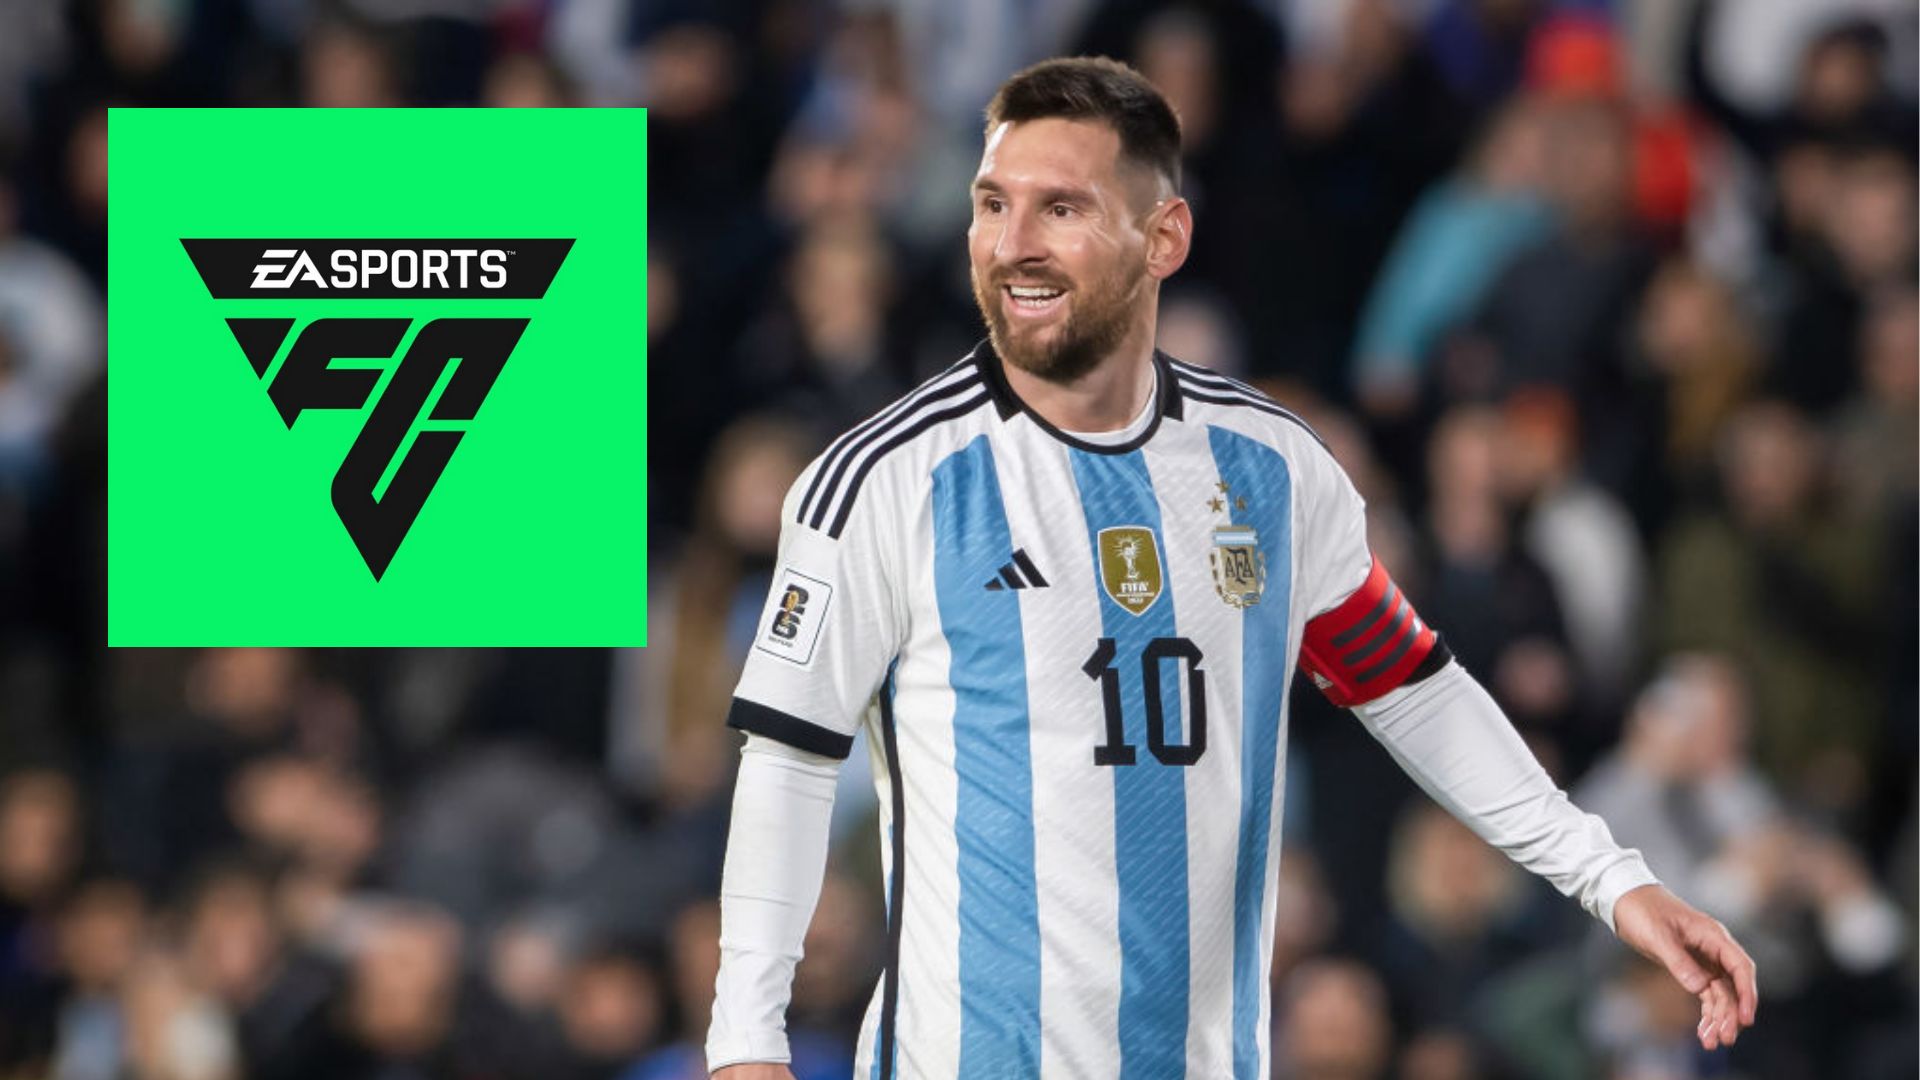 Lionel Messi no longer highest-rated player on EAFC 24: The 24 best men's and women's players revealed